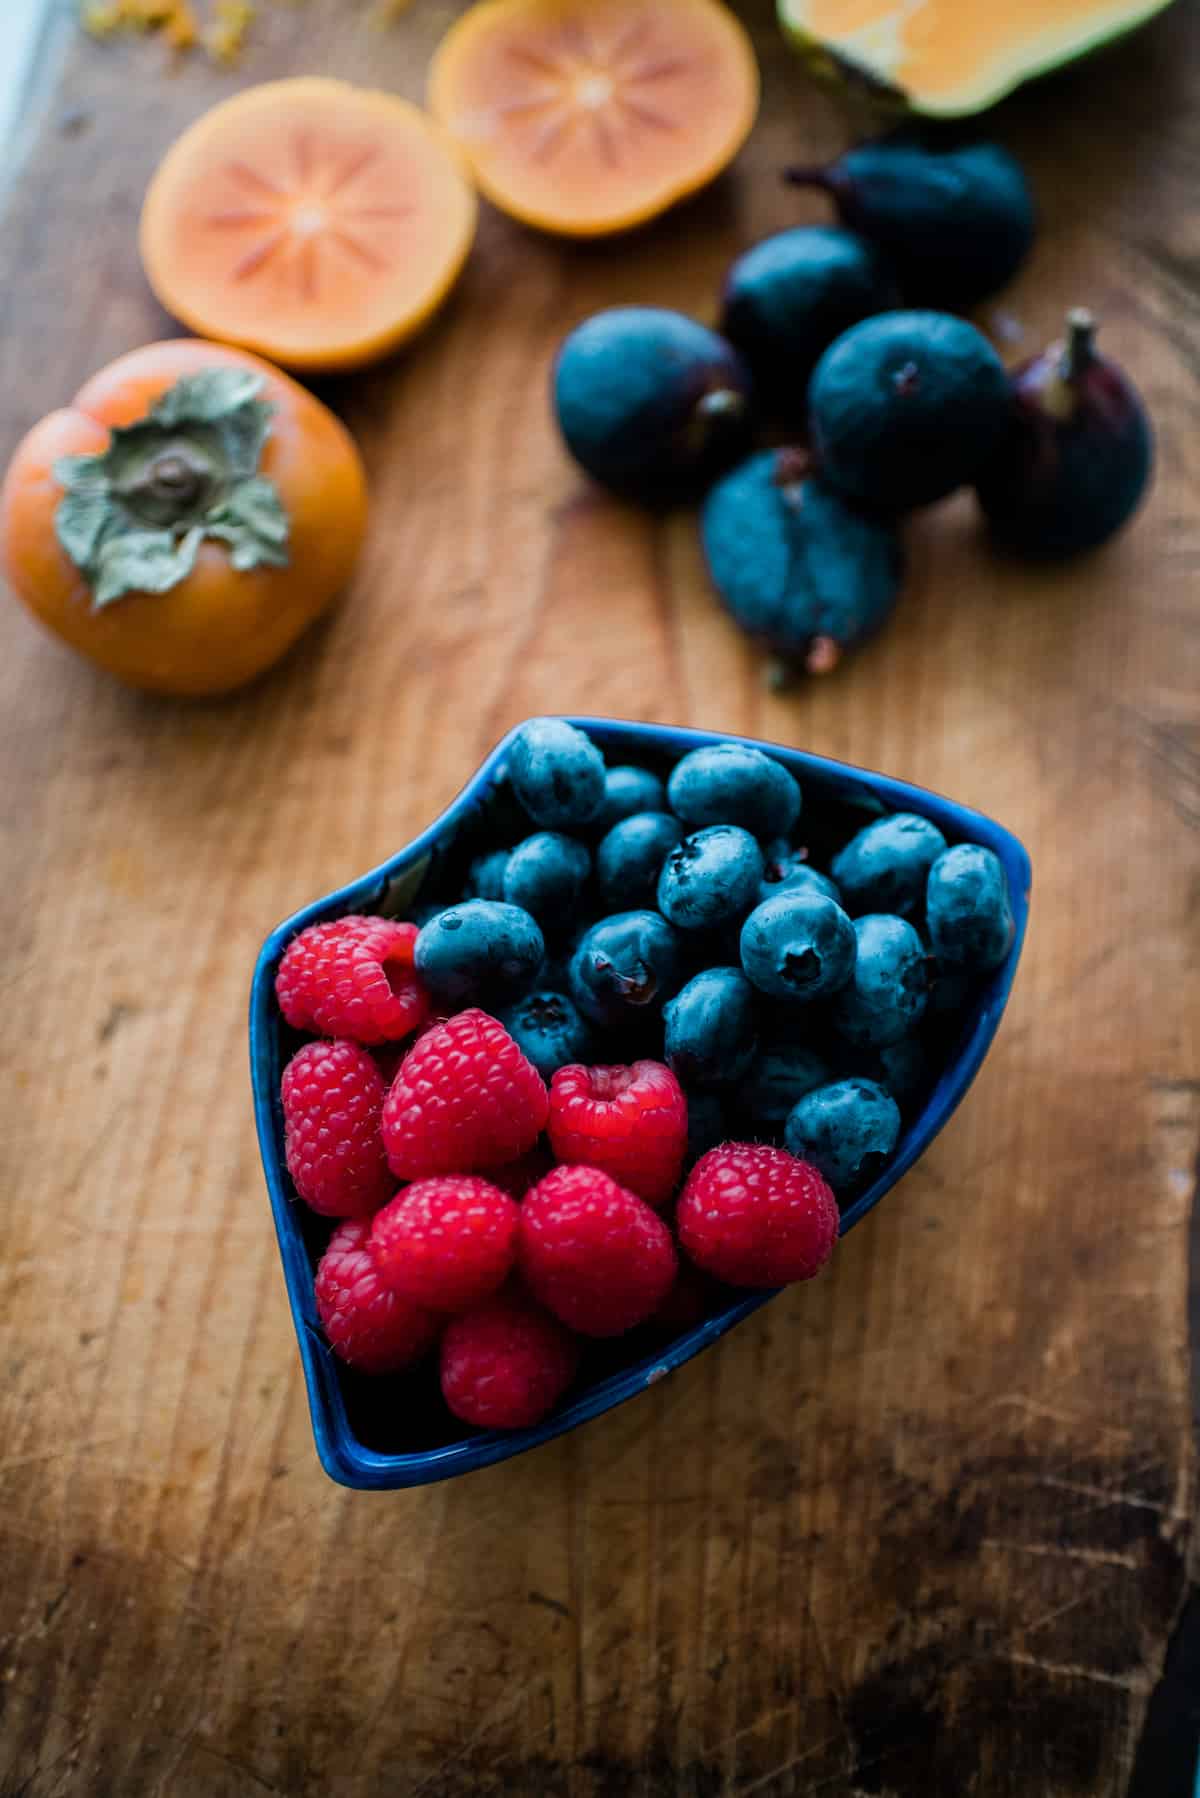 raspberries and blueberries in one sectioned bowl of a serving platter for making a yogurt parfait bowl.